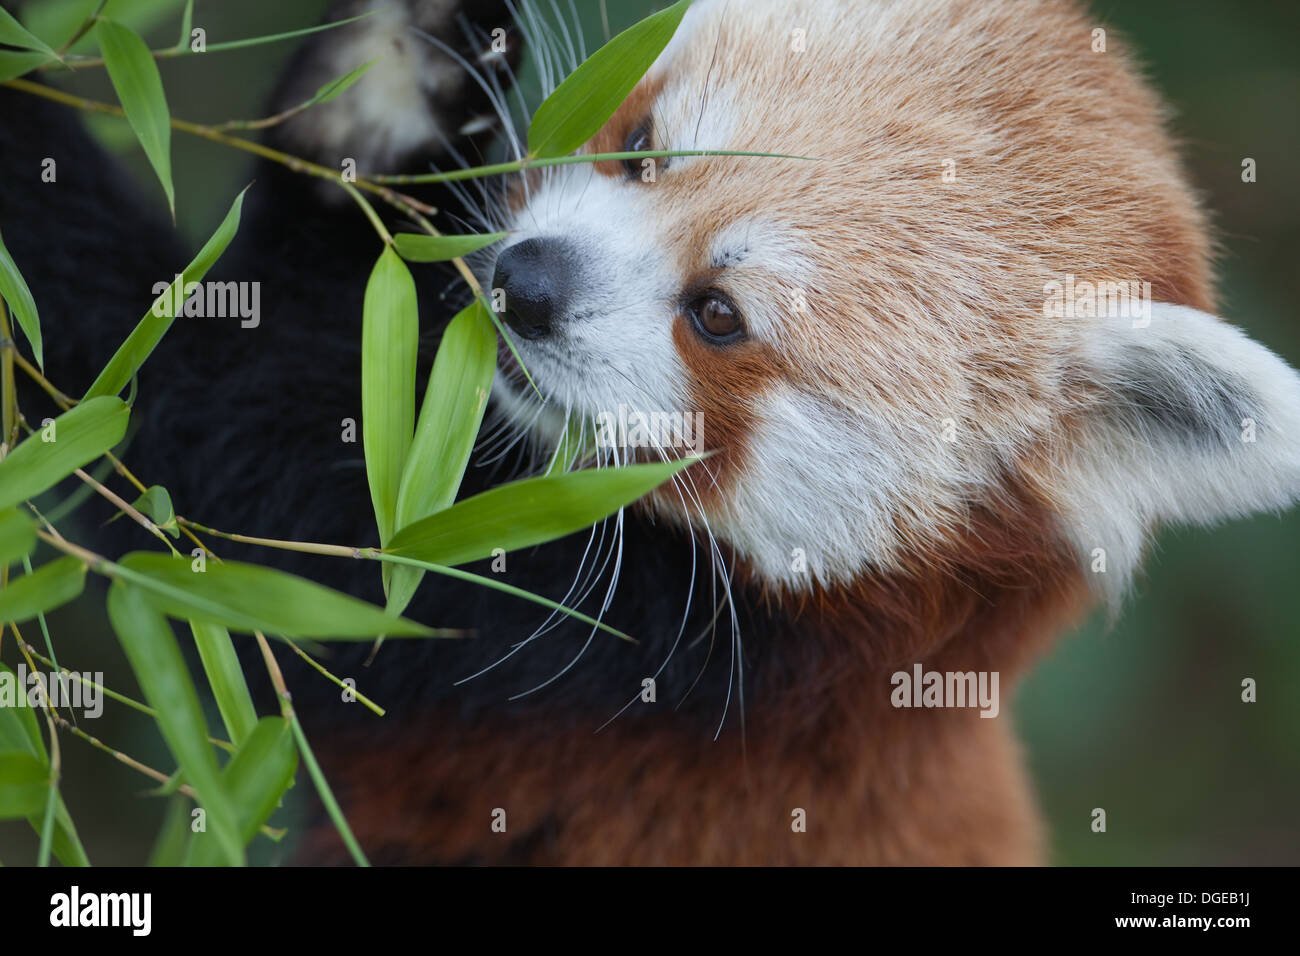 Red, or Lesser Panda (Ailurus fulgens). Feeding on a young Bamboo shoot. Stock Photo